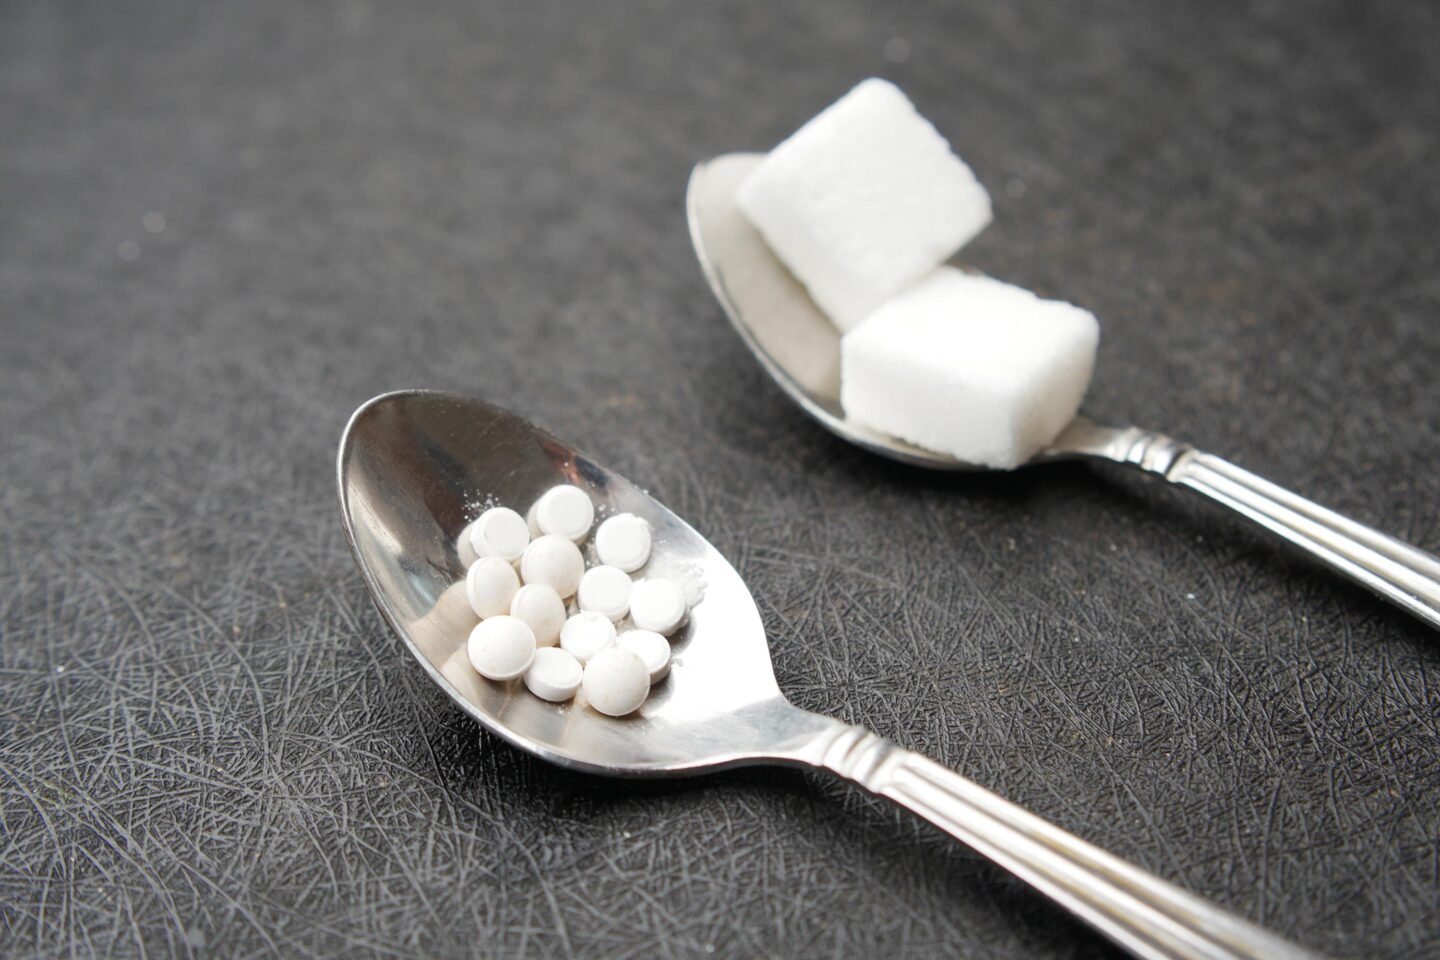 artificial sweetener tablets and sugar cubes in separate spoons